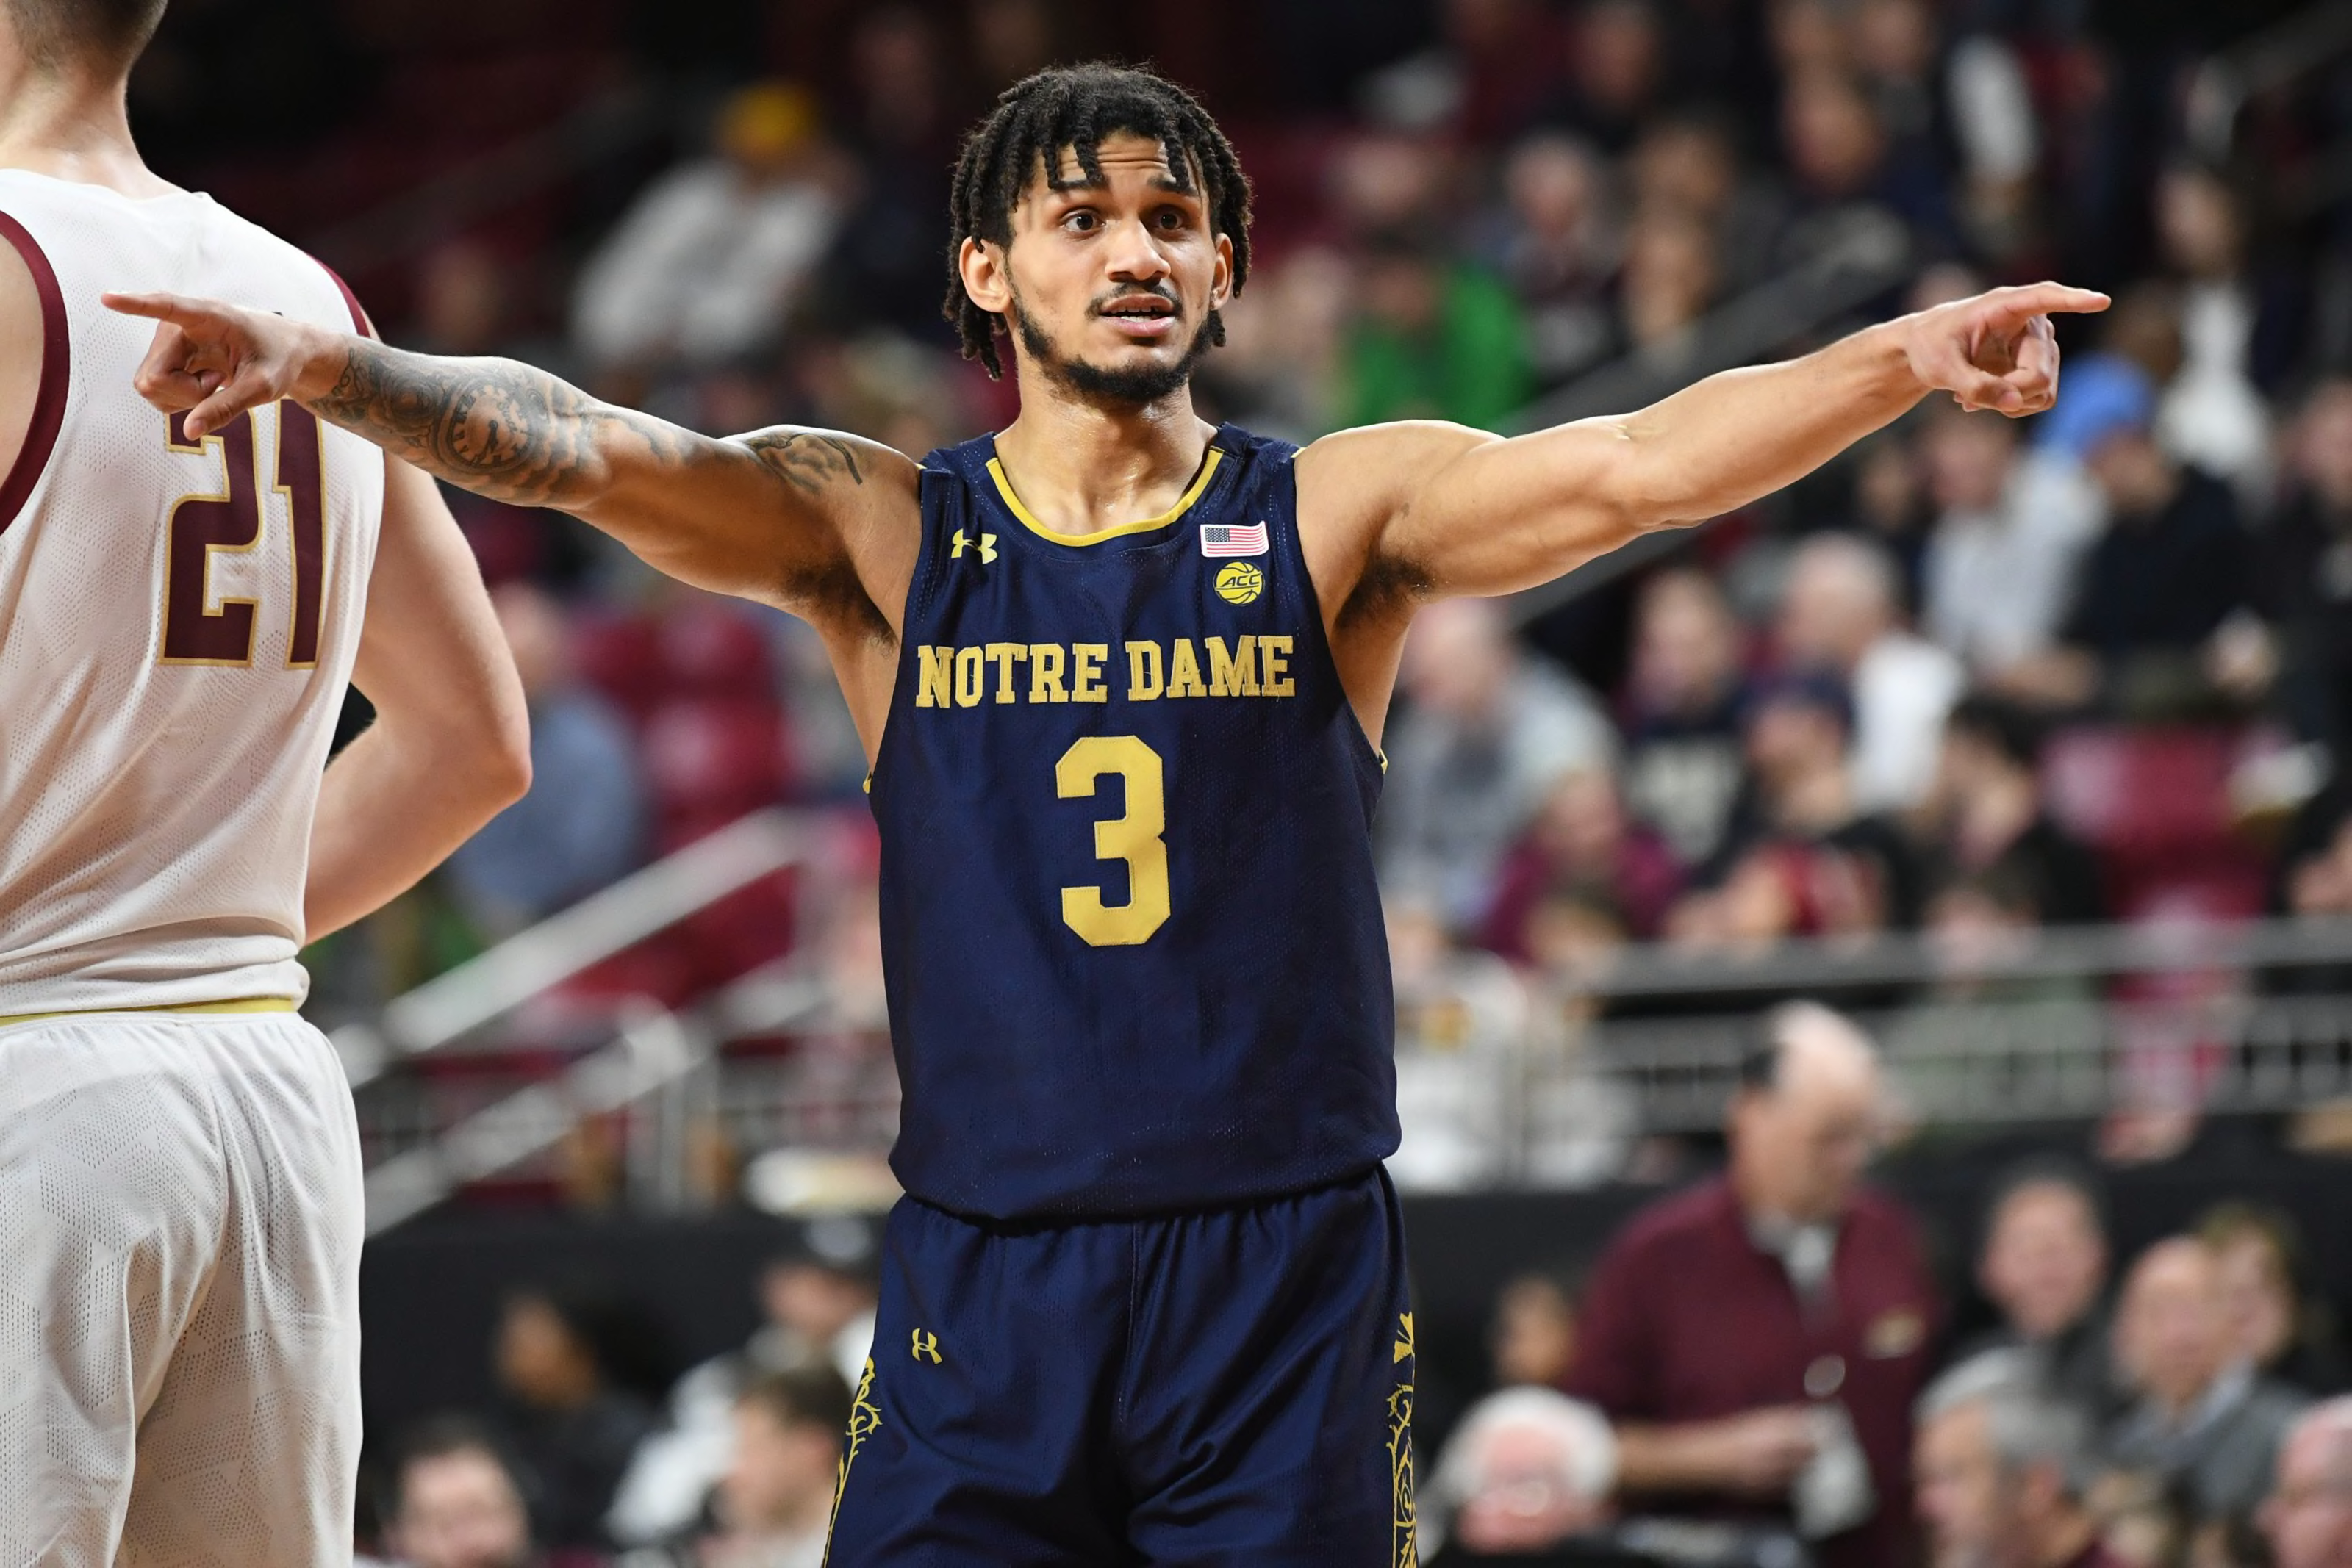 Notre Dame Men's Basketball: 3 things we learned in win over Miami